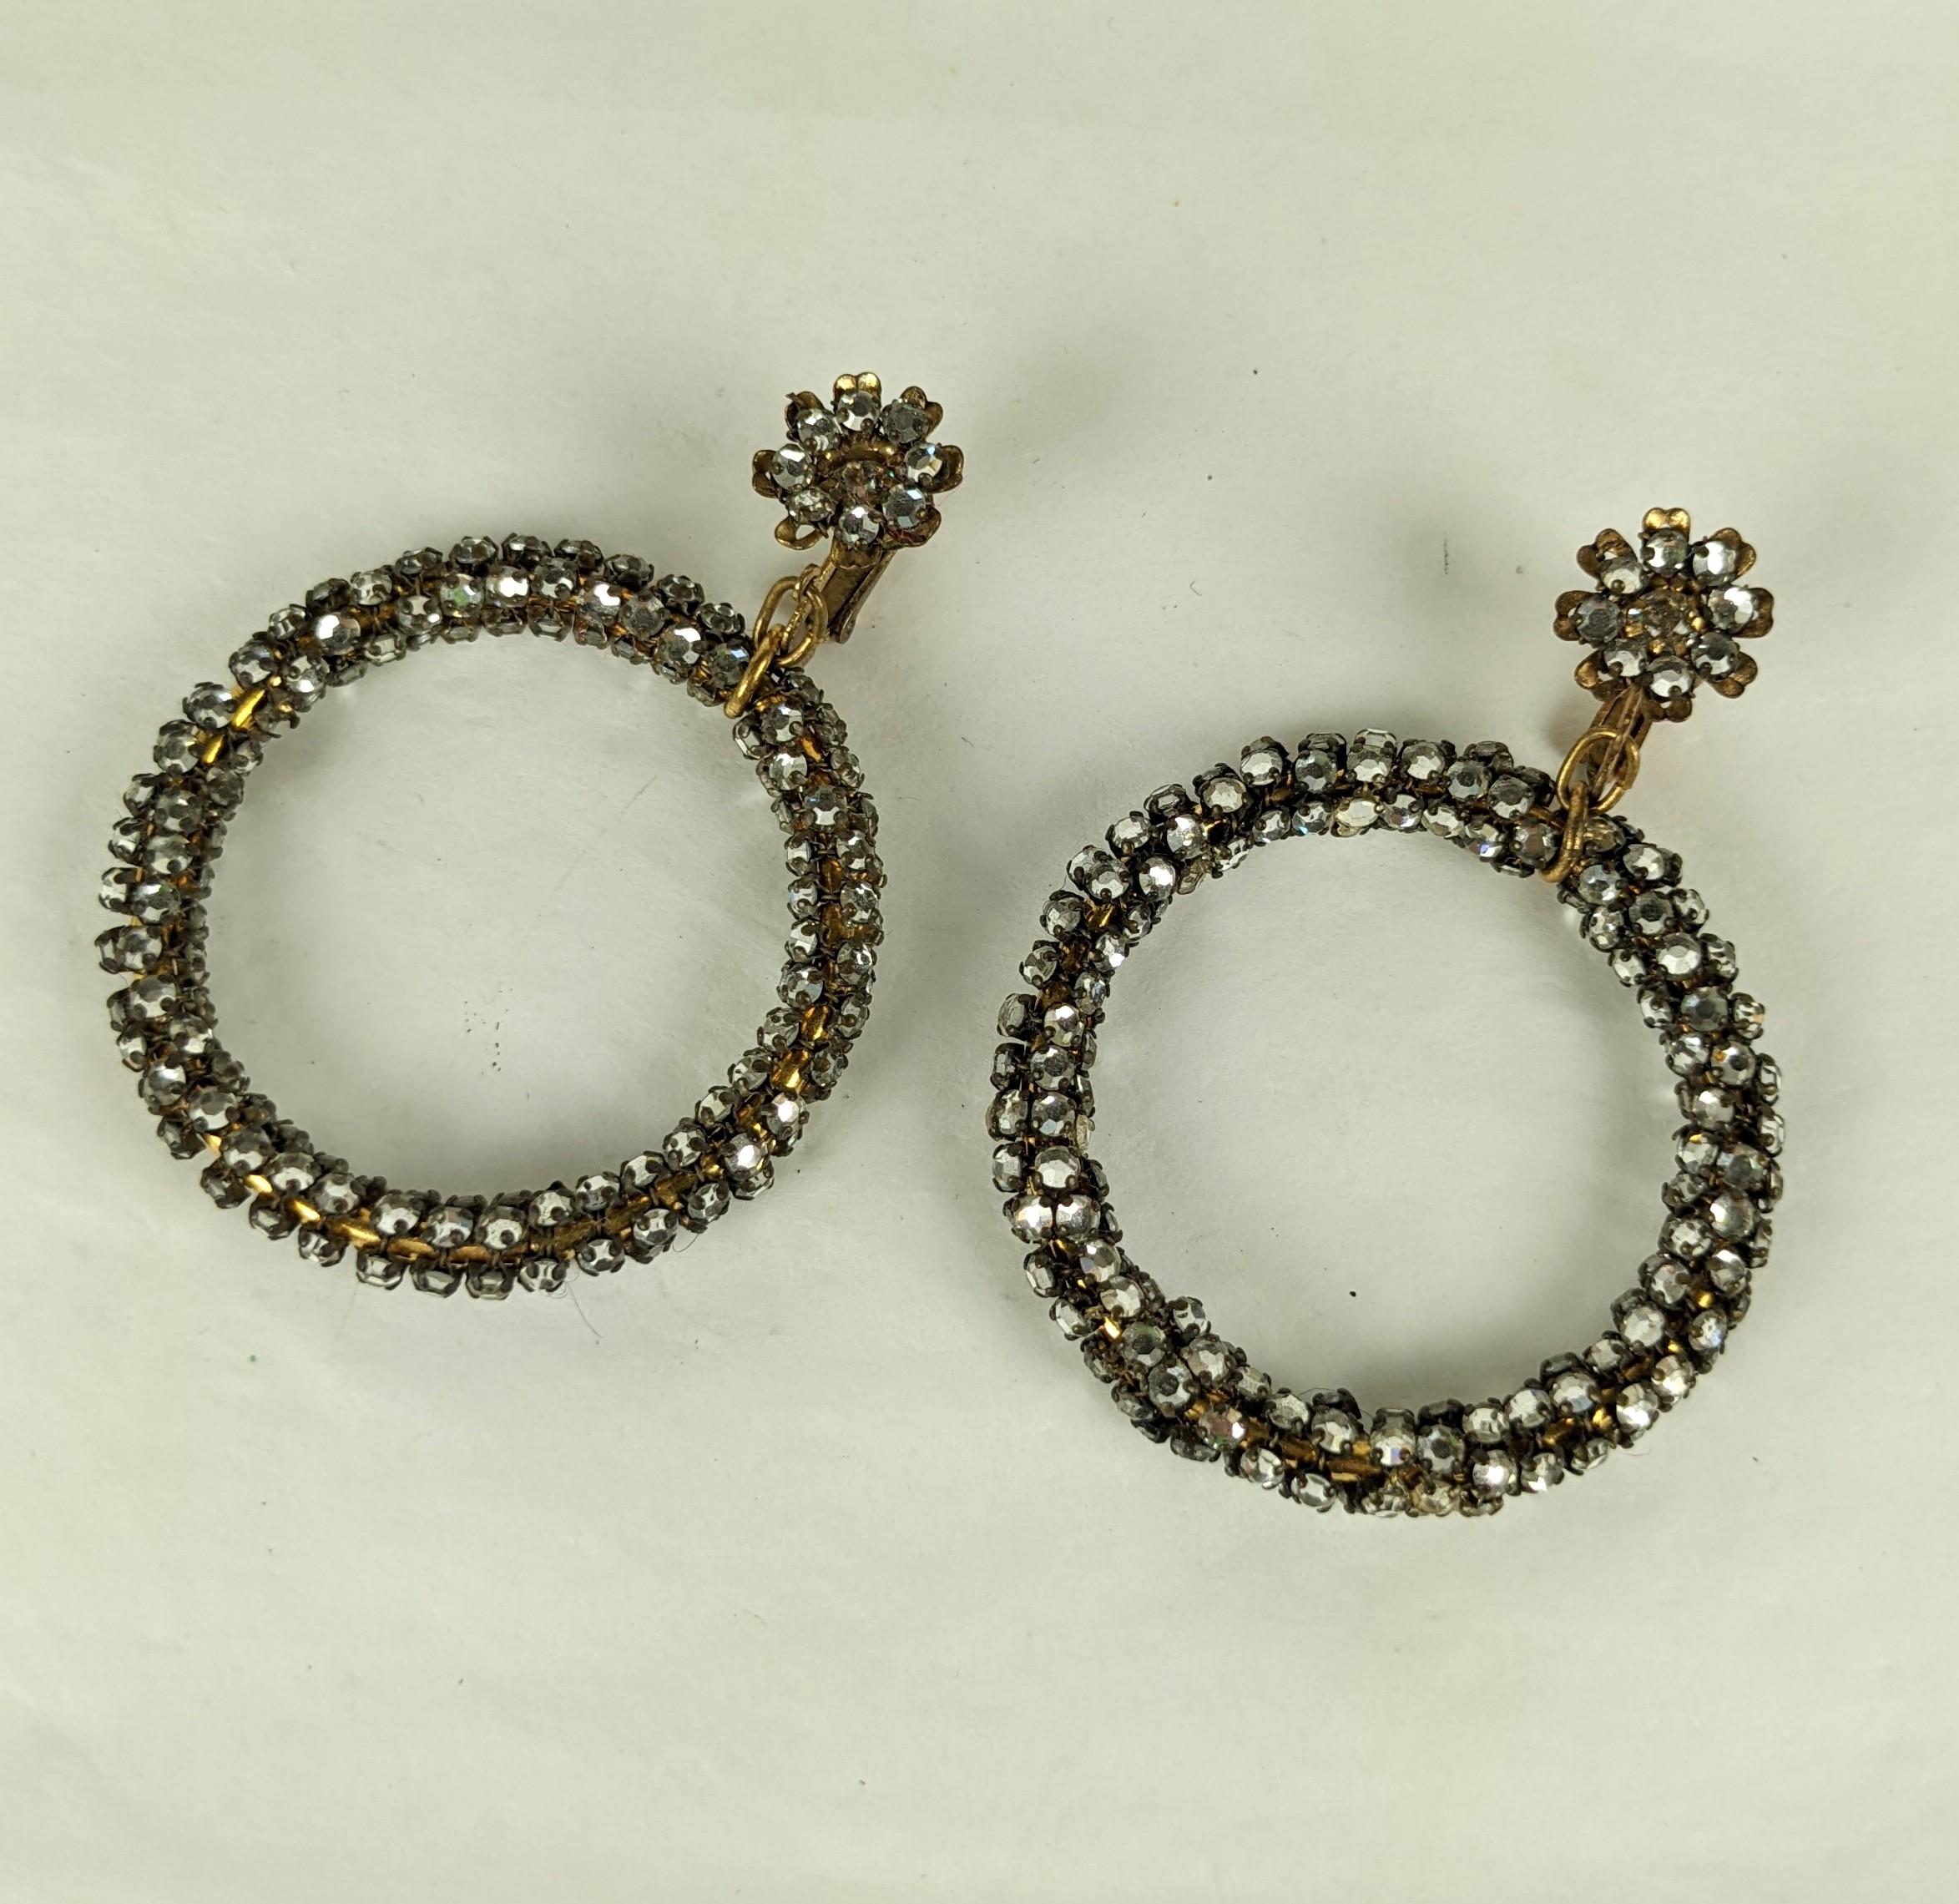 Miriam Haskell Rose Montee Hoop Earrings from the 1950's with clip back fittings. Hoops and flower top are completely covered with hand sewn rose montee crystals. 2.5